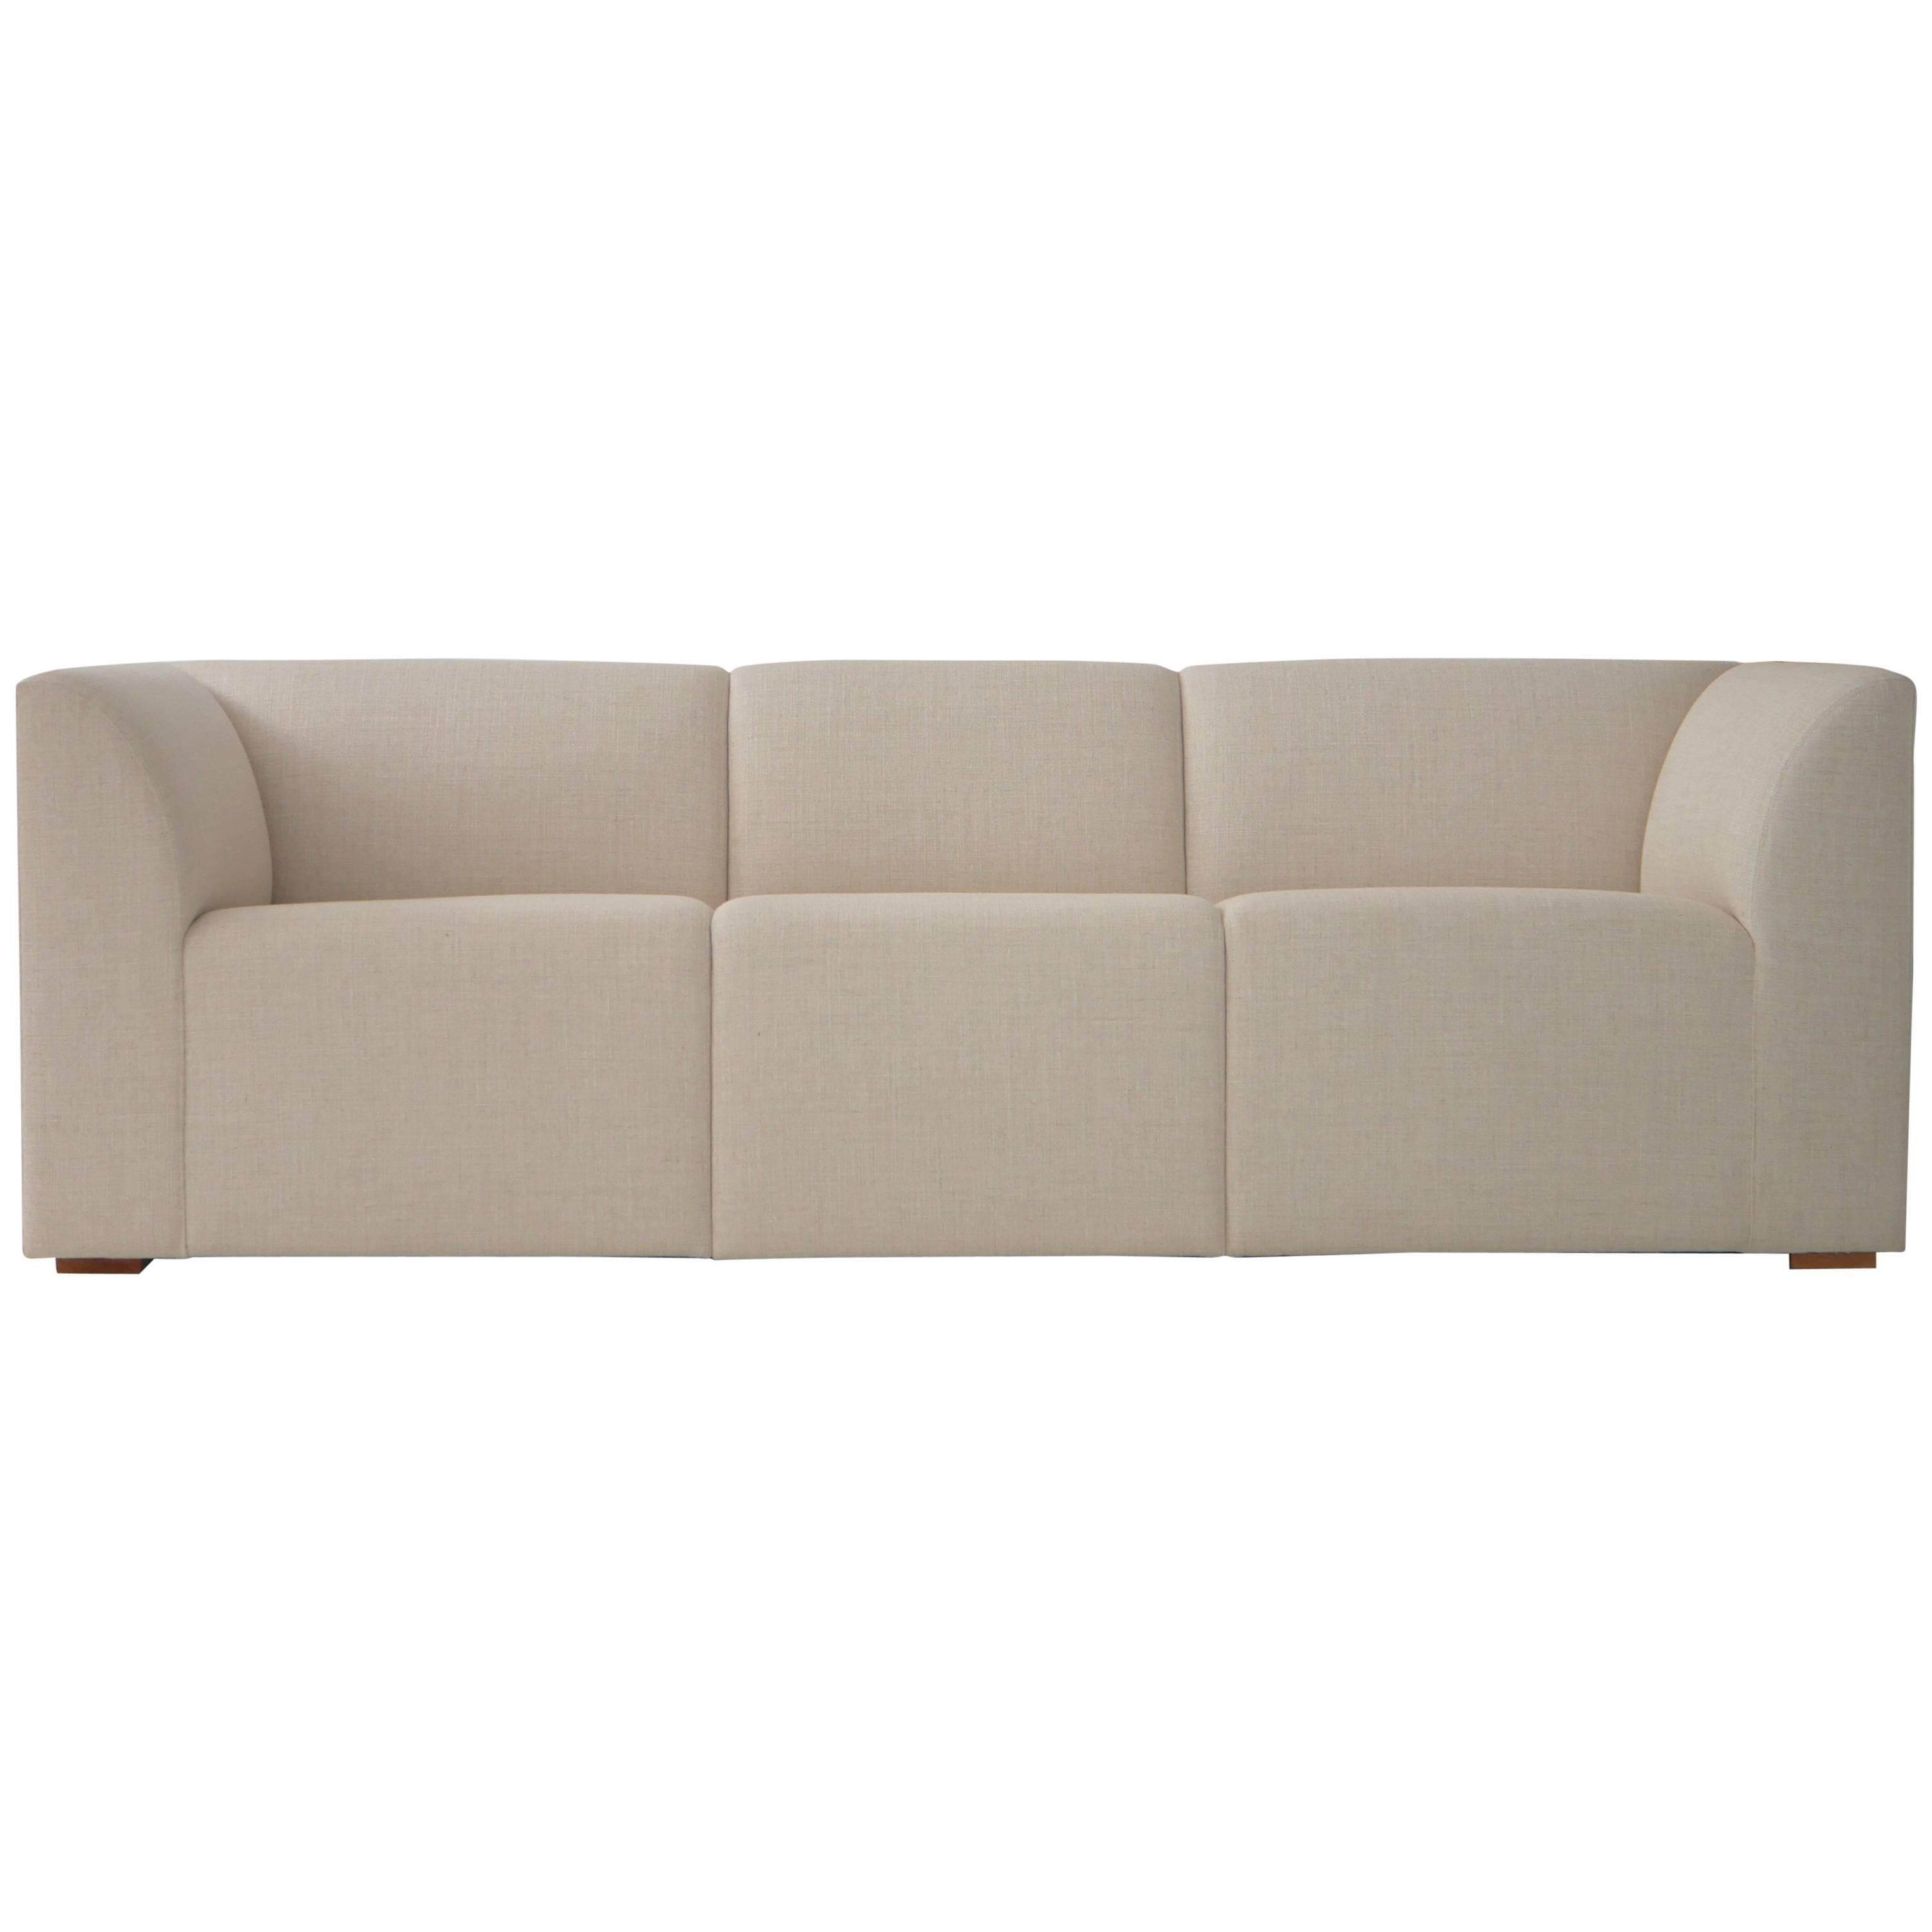 Michael Hurst, French designer now residing in Mexico City designed this prototype sofa in 2002. The piece was acquired directly from the designer in 2014. The sofa has just been reupholstered in a natural linen. Swatches available. About 5 or 6